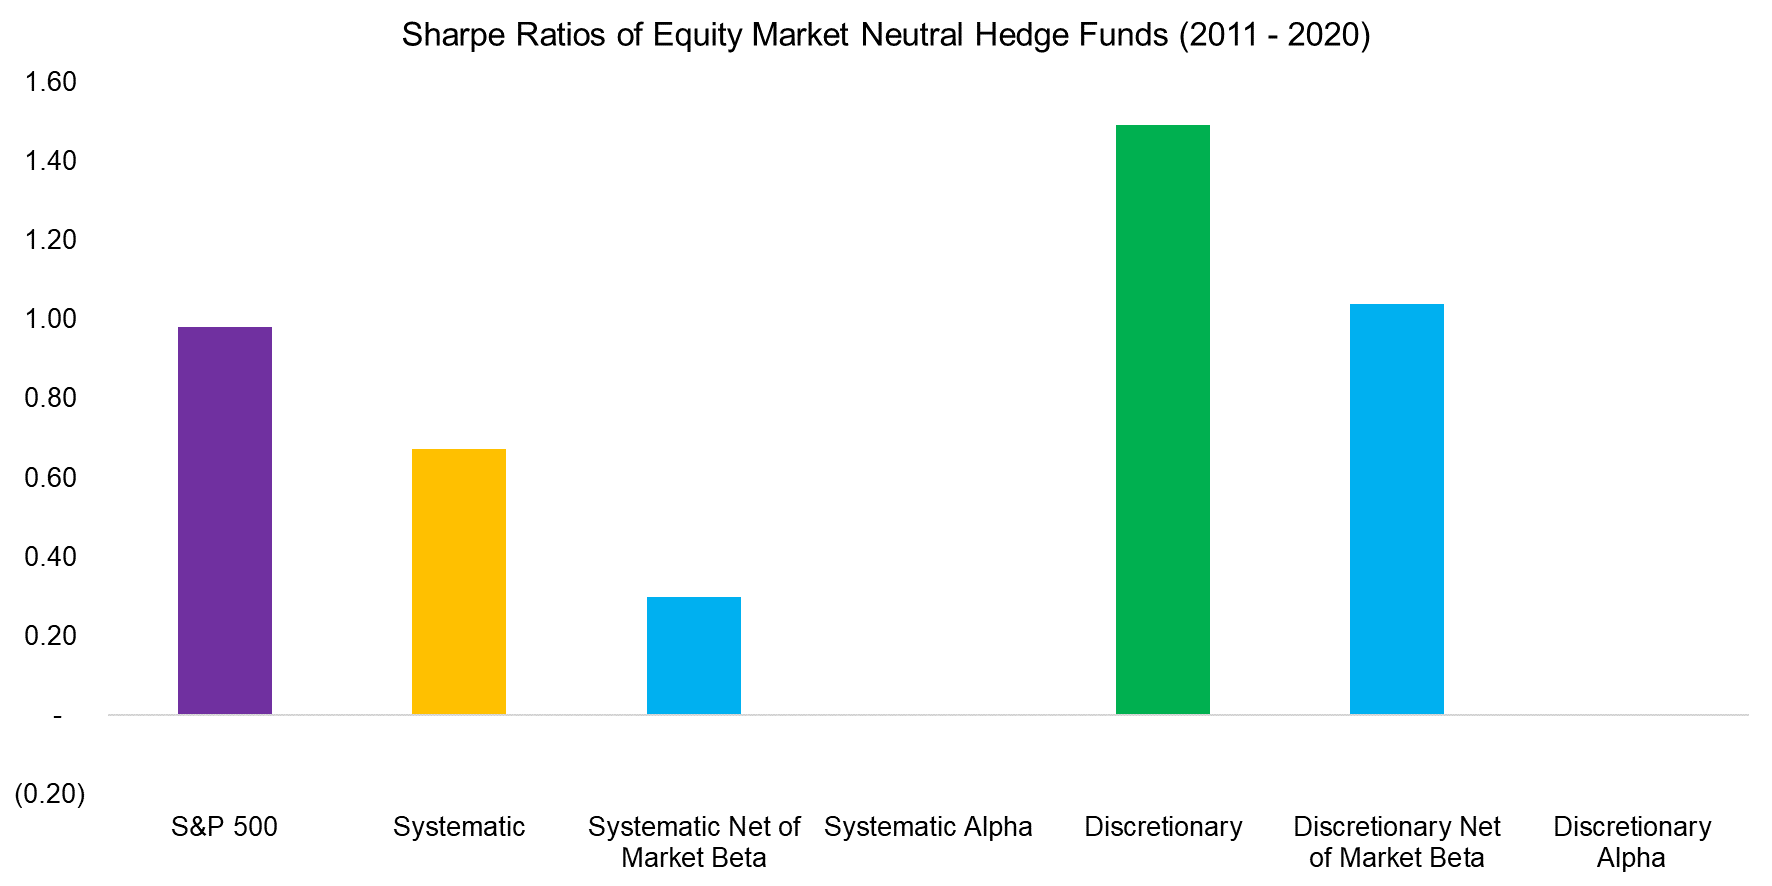 Sharpe Ratios of Equity Market Neutral Hedge Funds (2011 - 2020)